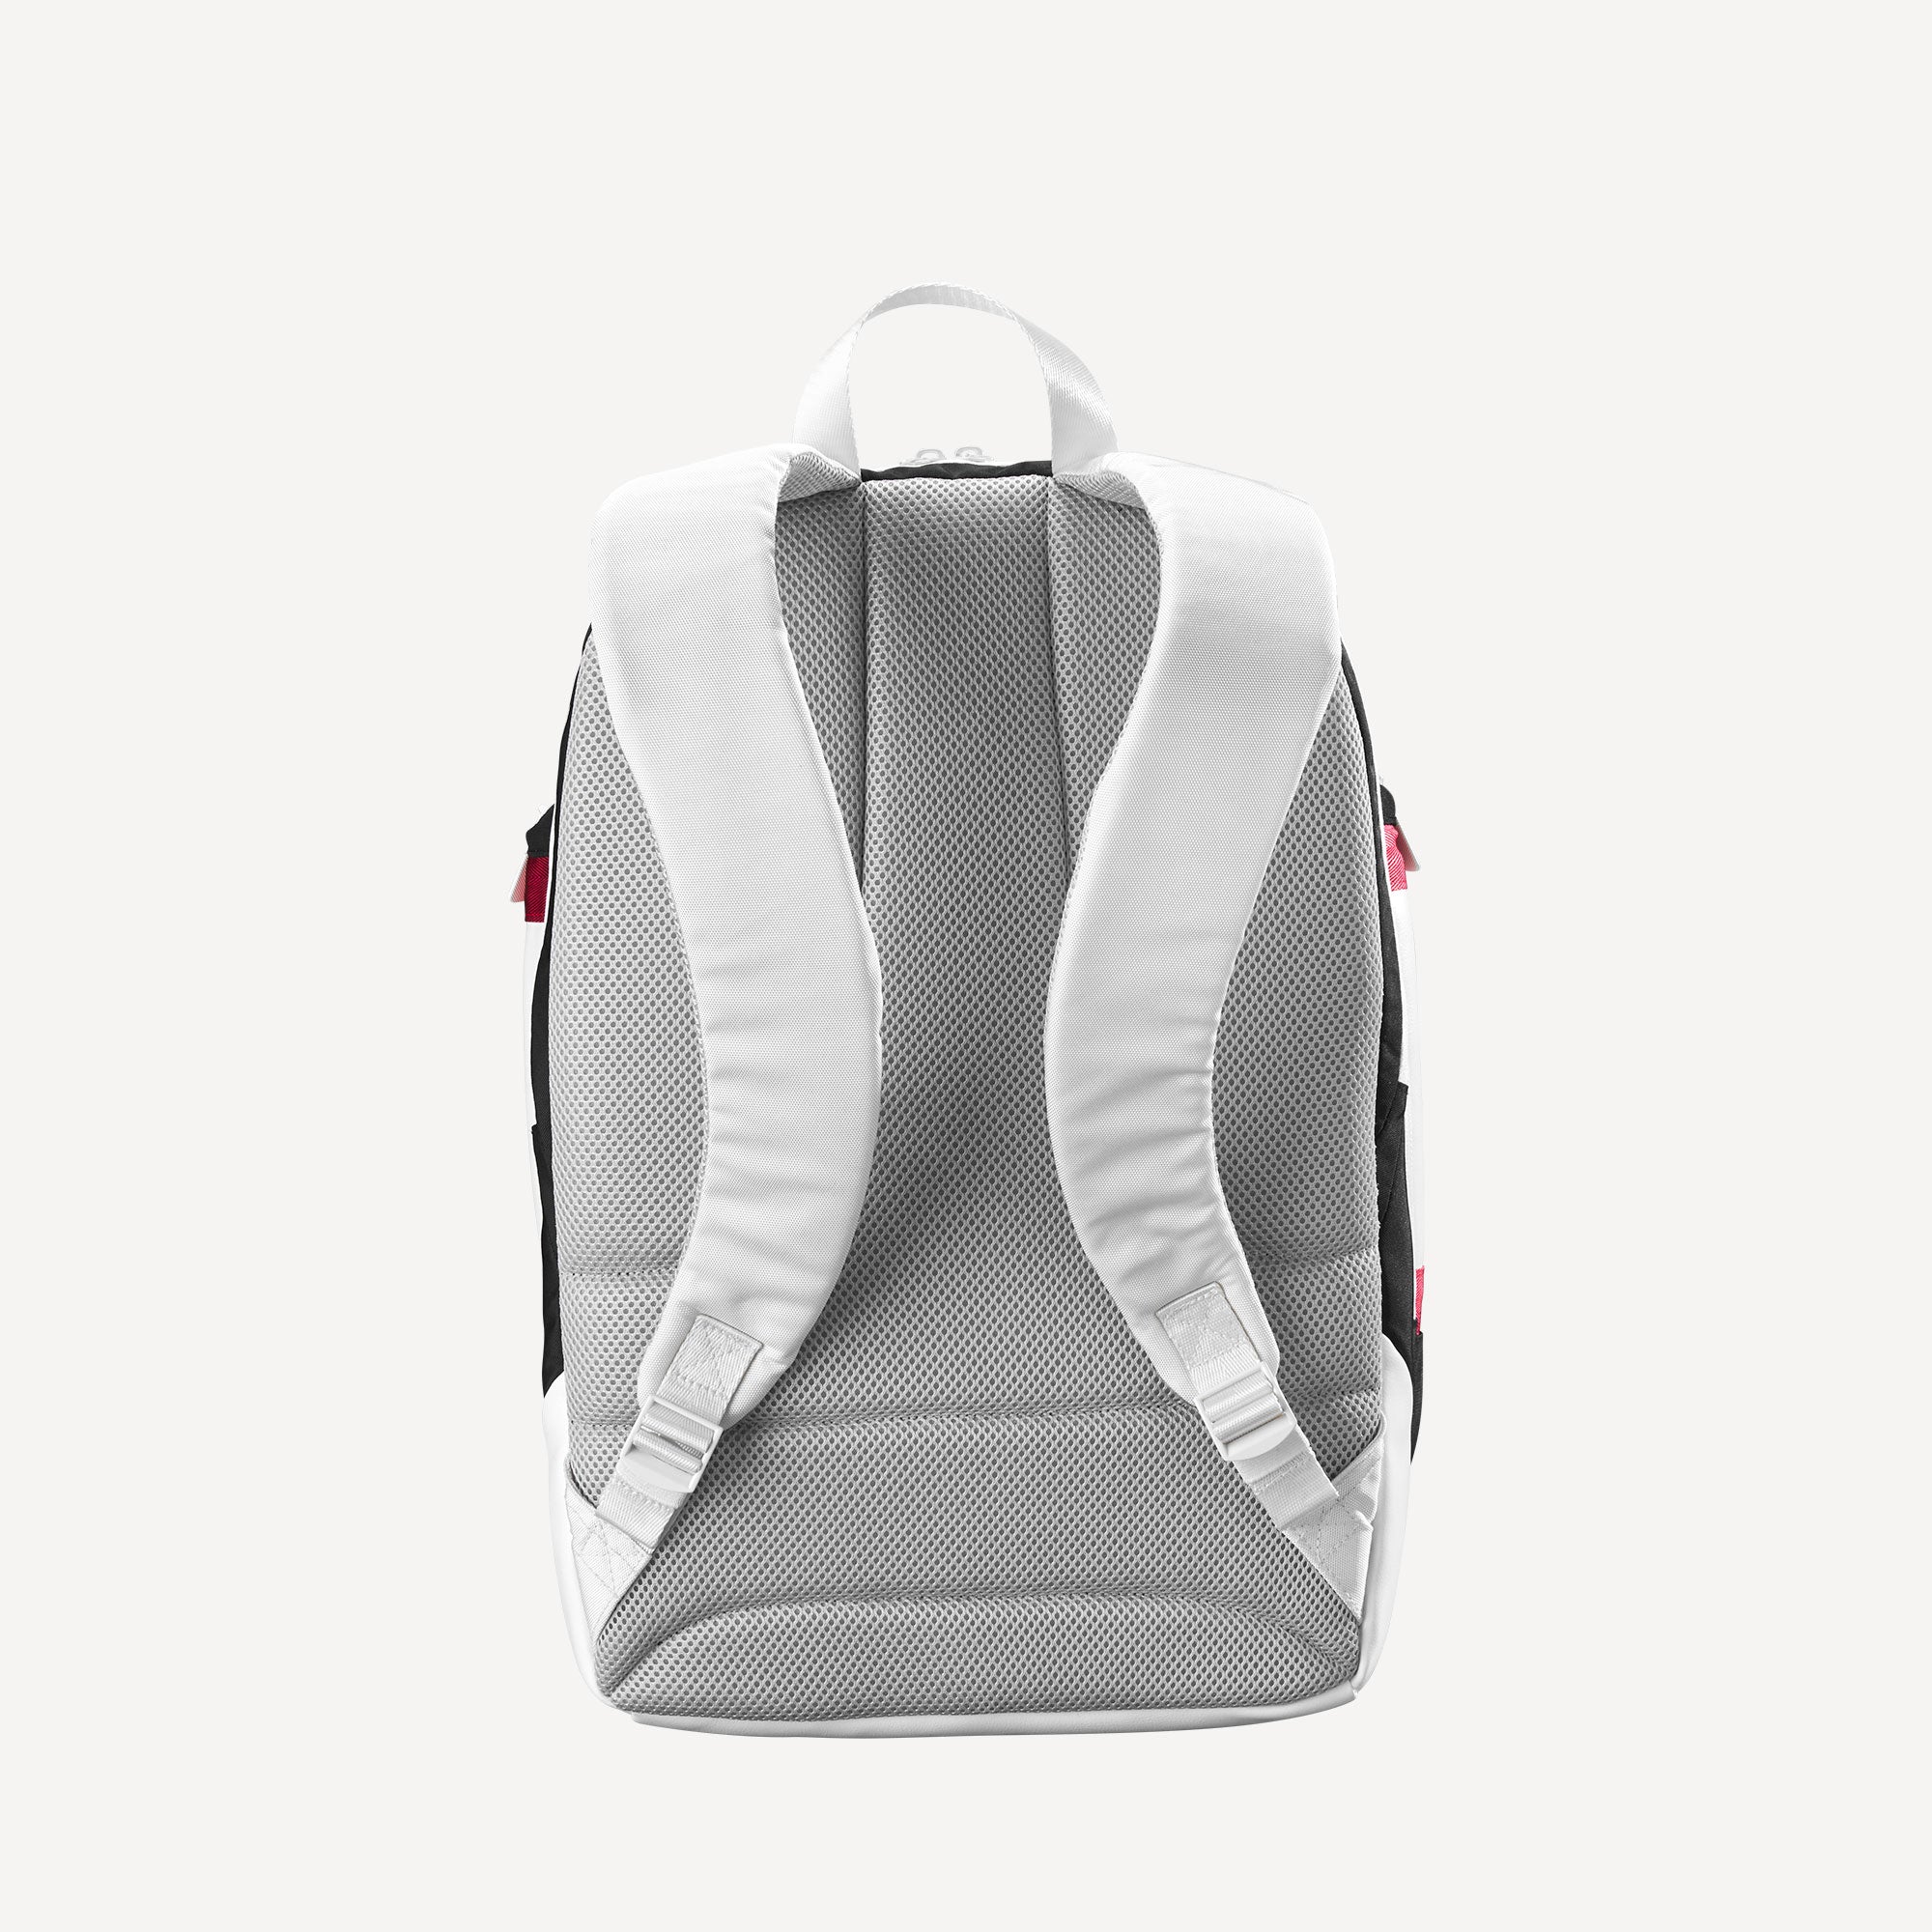 Wilson Courage Collection Tennis Backpack - Black/White/Red (3)